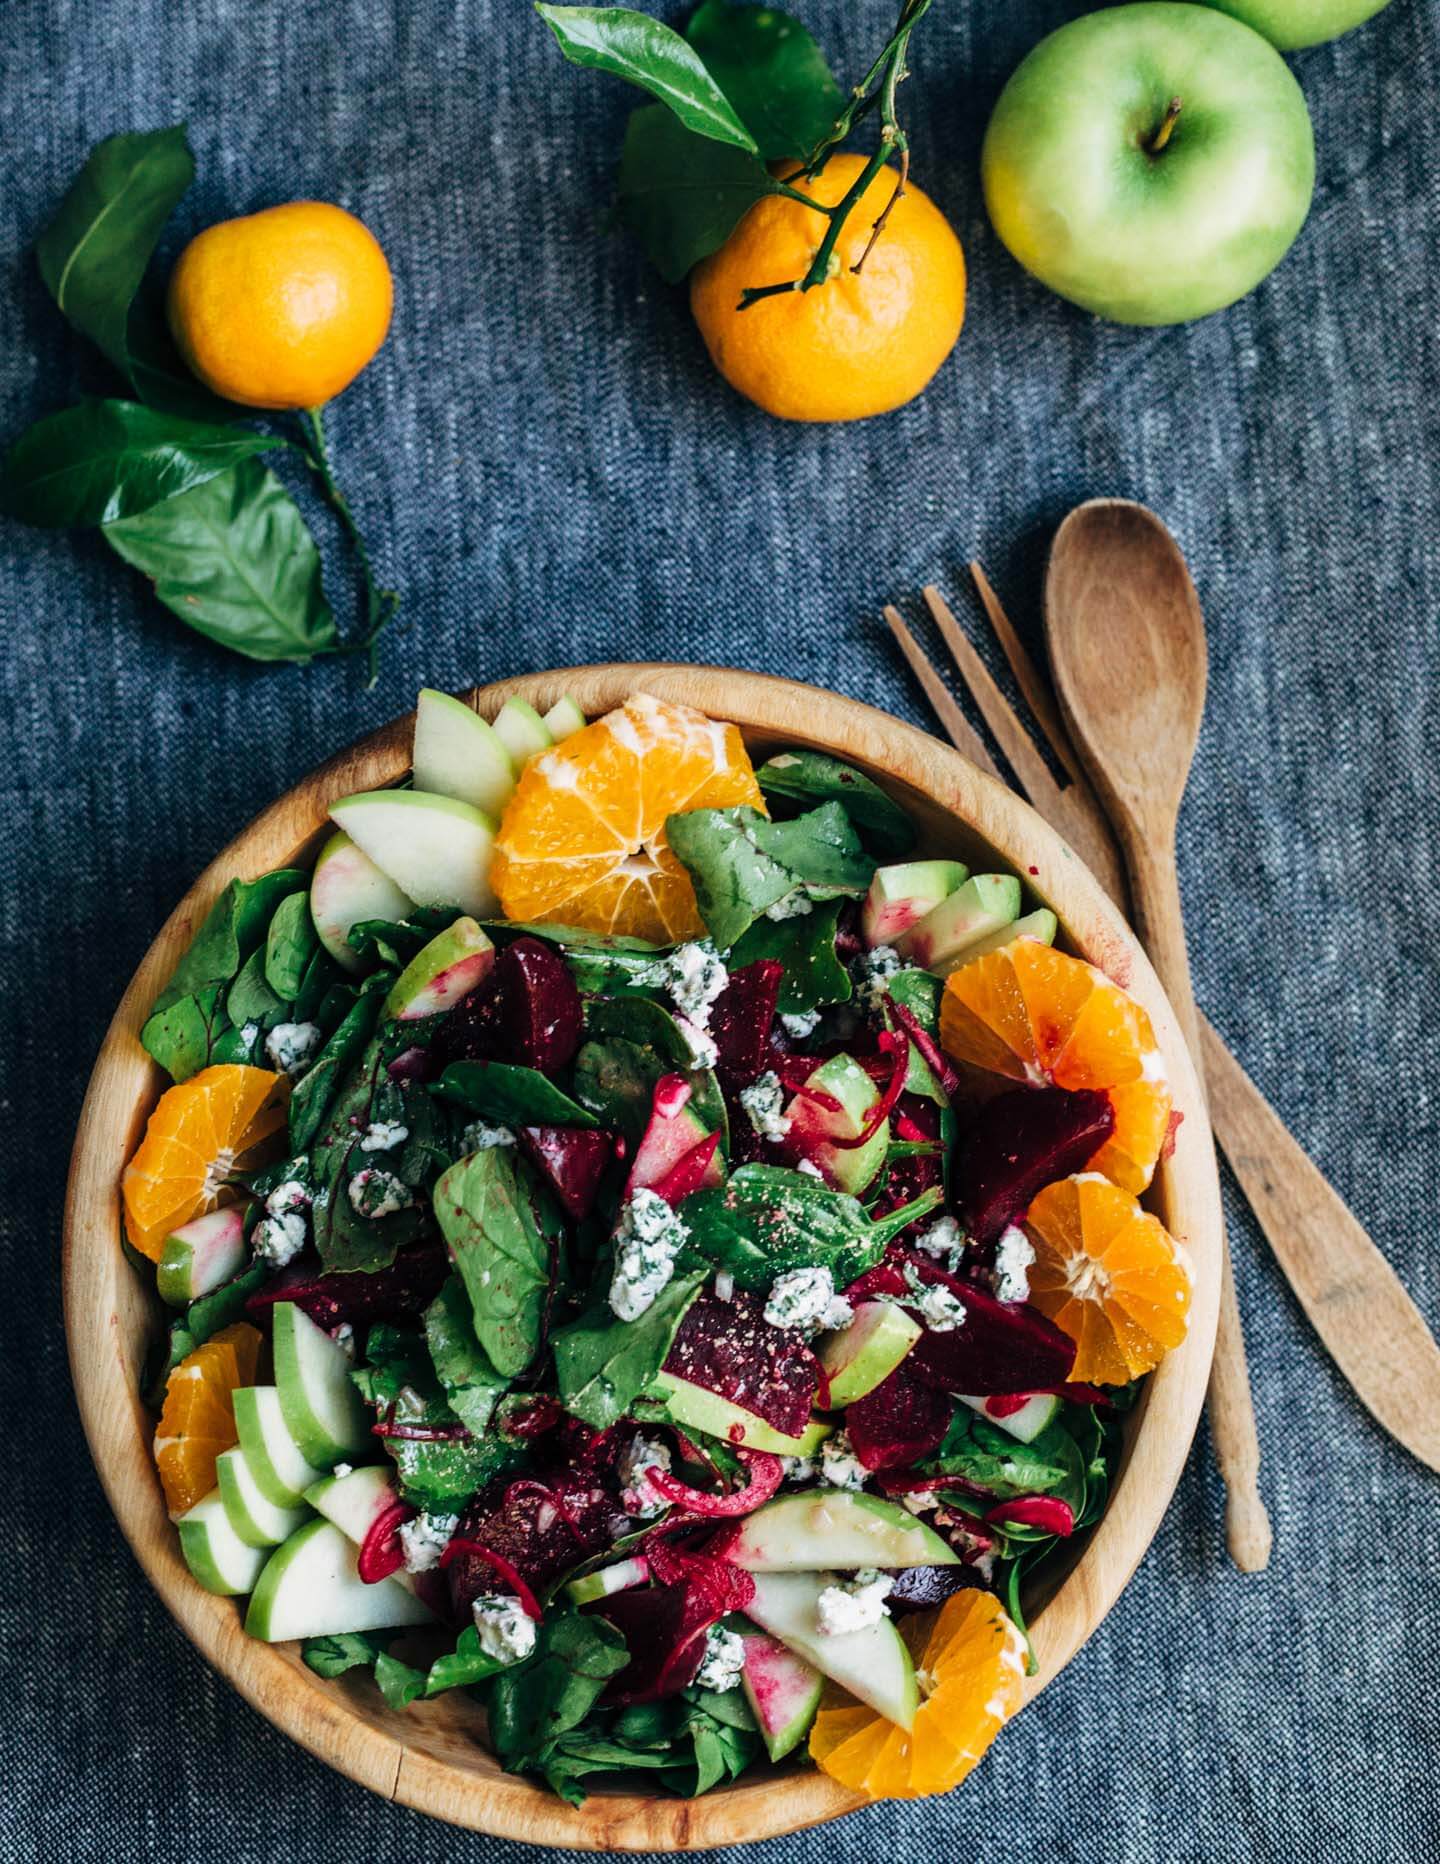 A bright and crunchy green apple and beet salad recipe featuring sliced green apples, marinated beets tossed with red wine vinegar and shallot, beet greens, spinach, herbed goat cheese crumbles, and a simple vinaigrette.